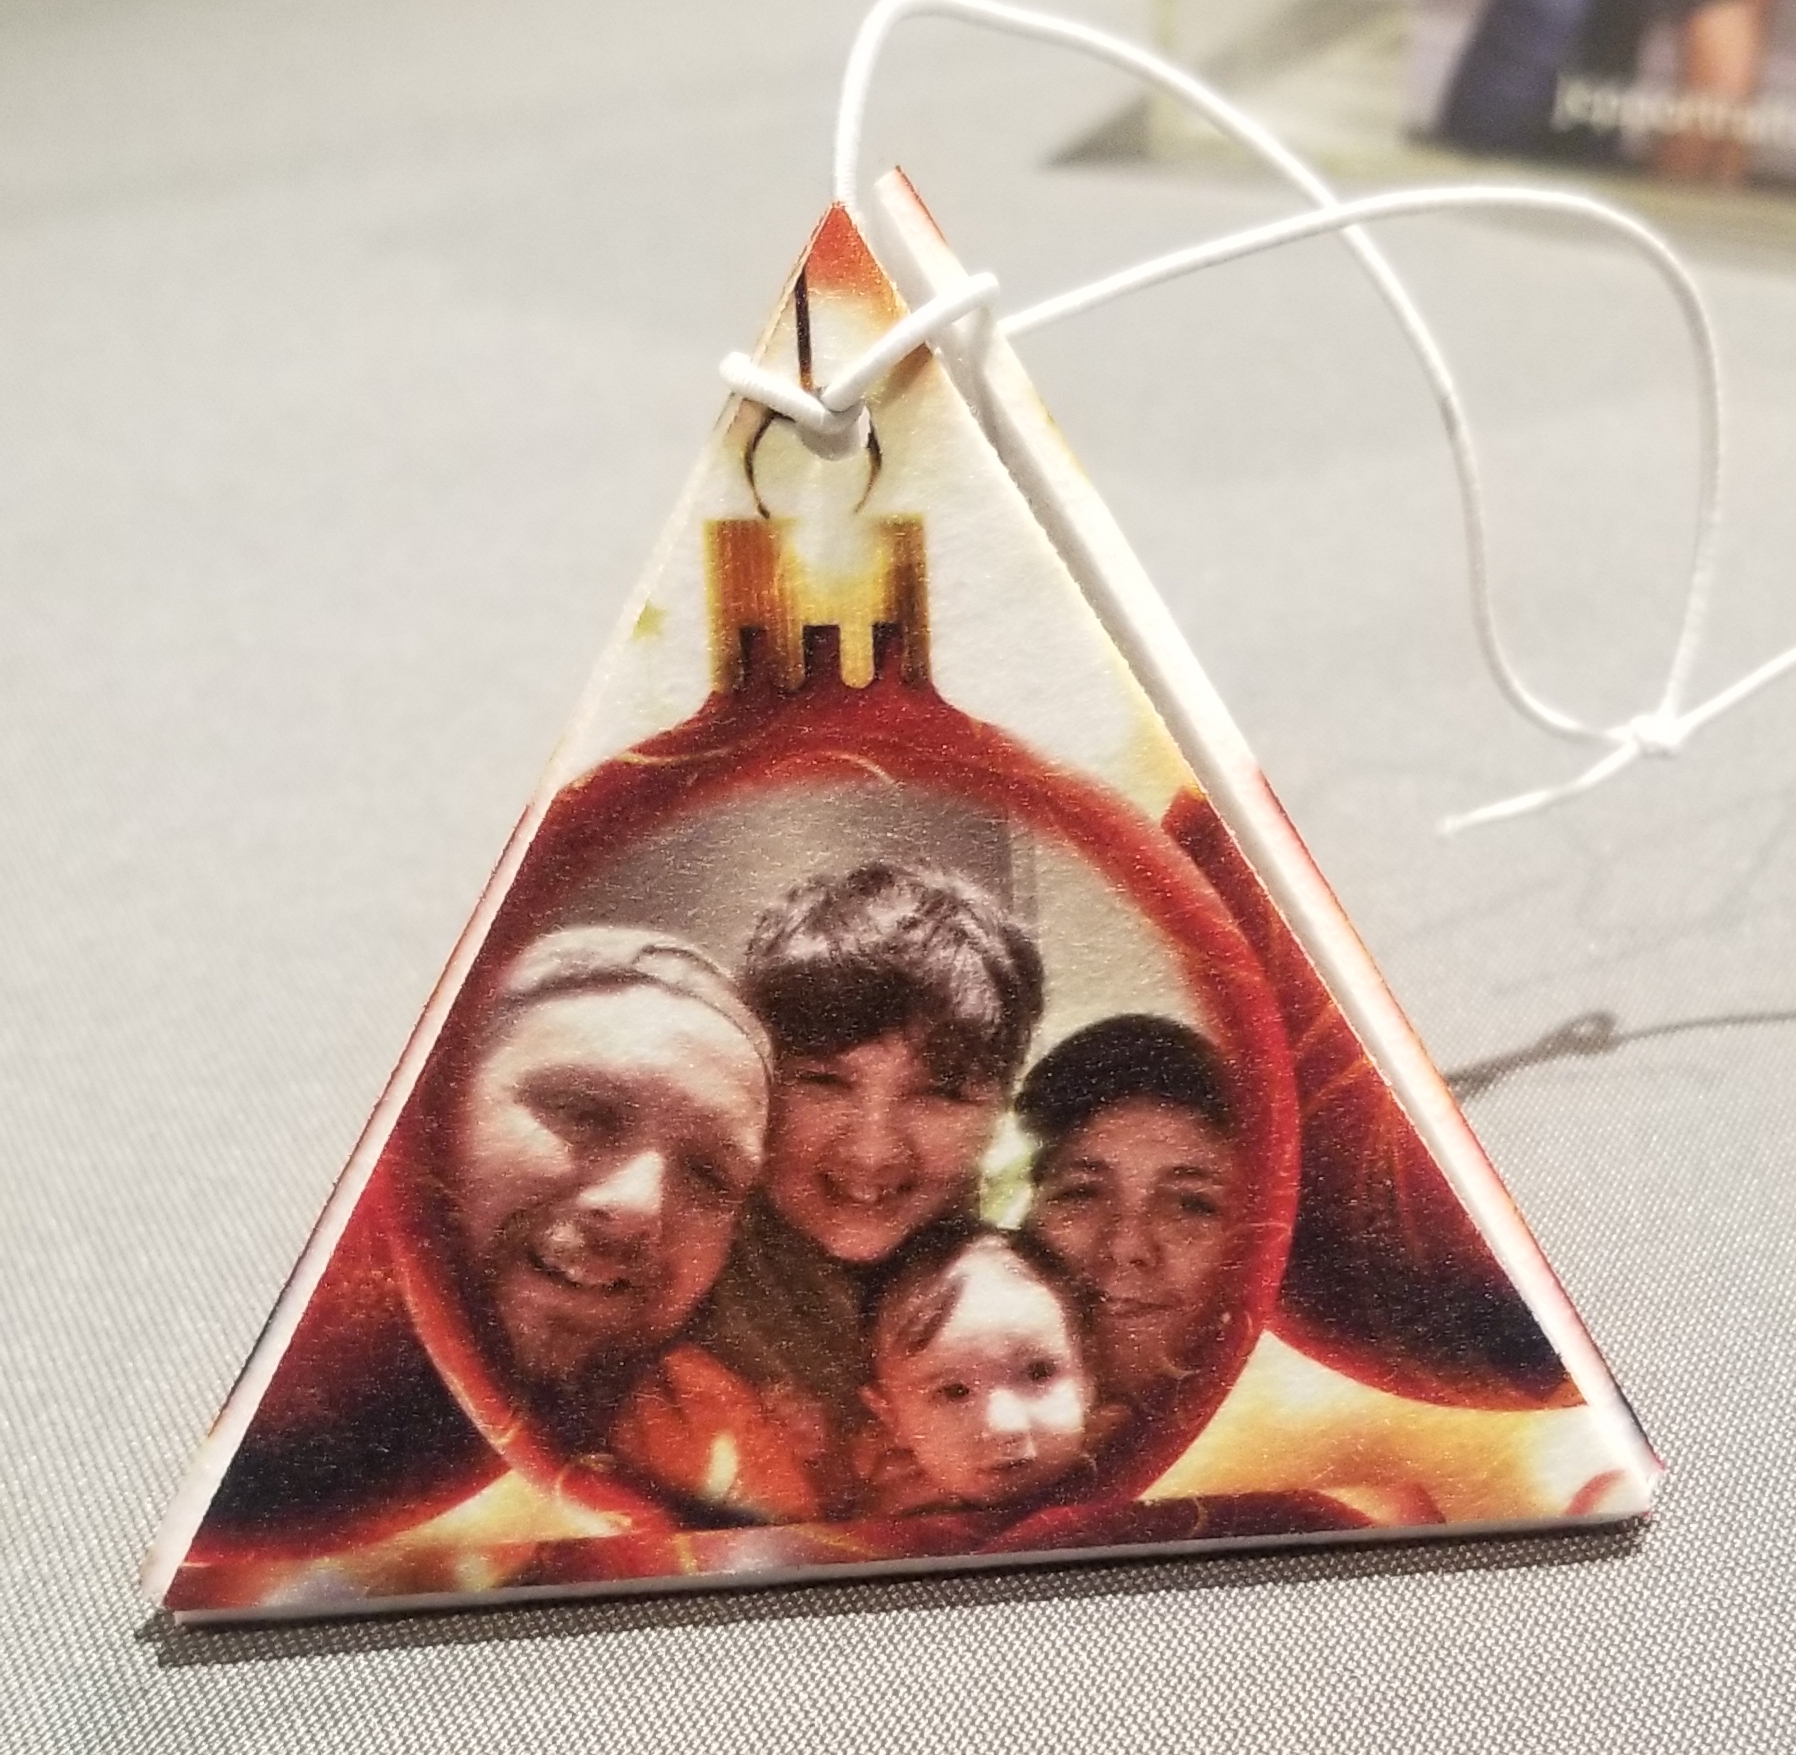 Make It Personal 3D Ornament made with sublimation printing